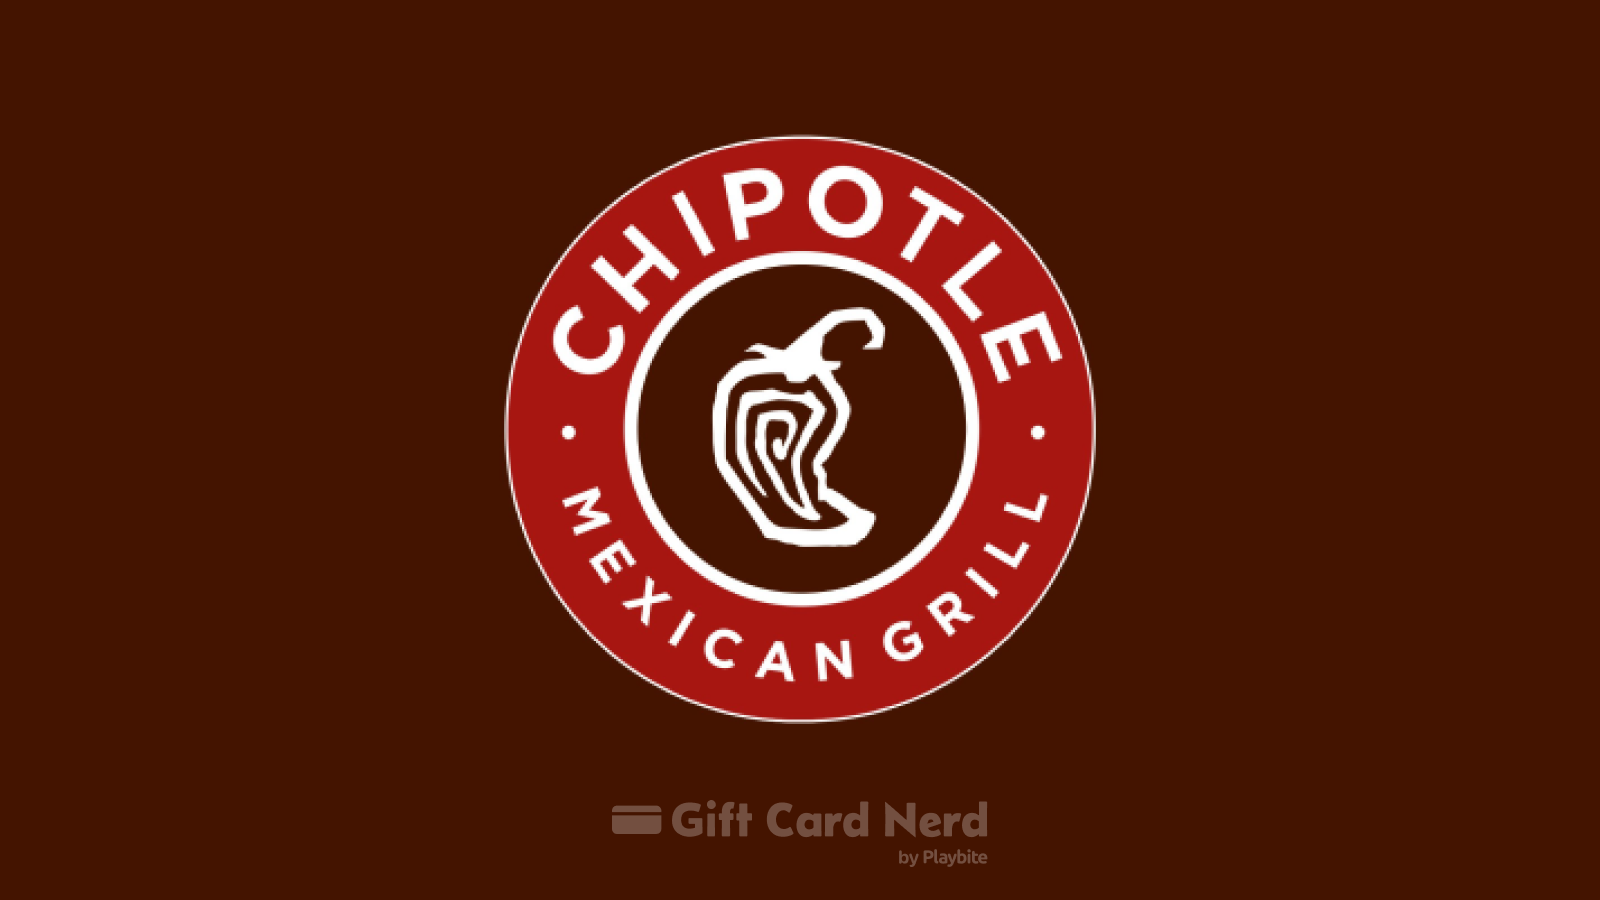 Can I use a Chipotle gift card on Steam?